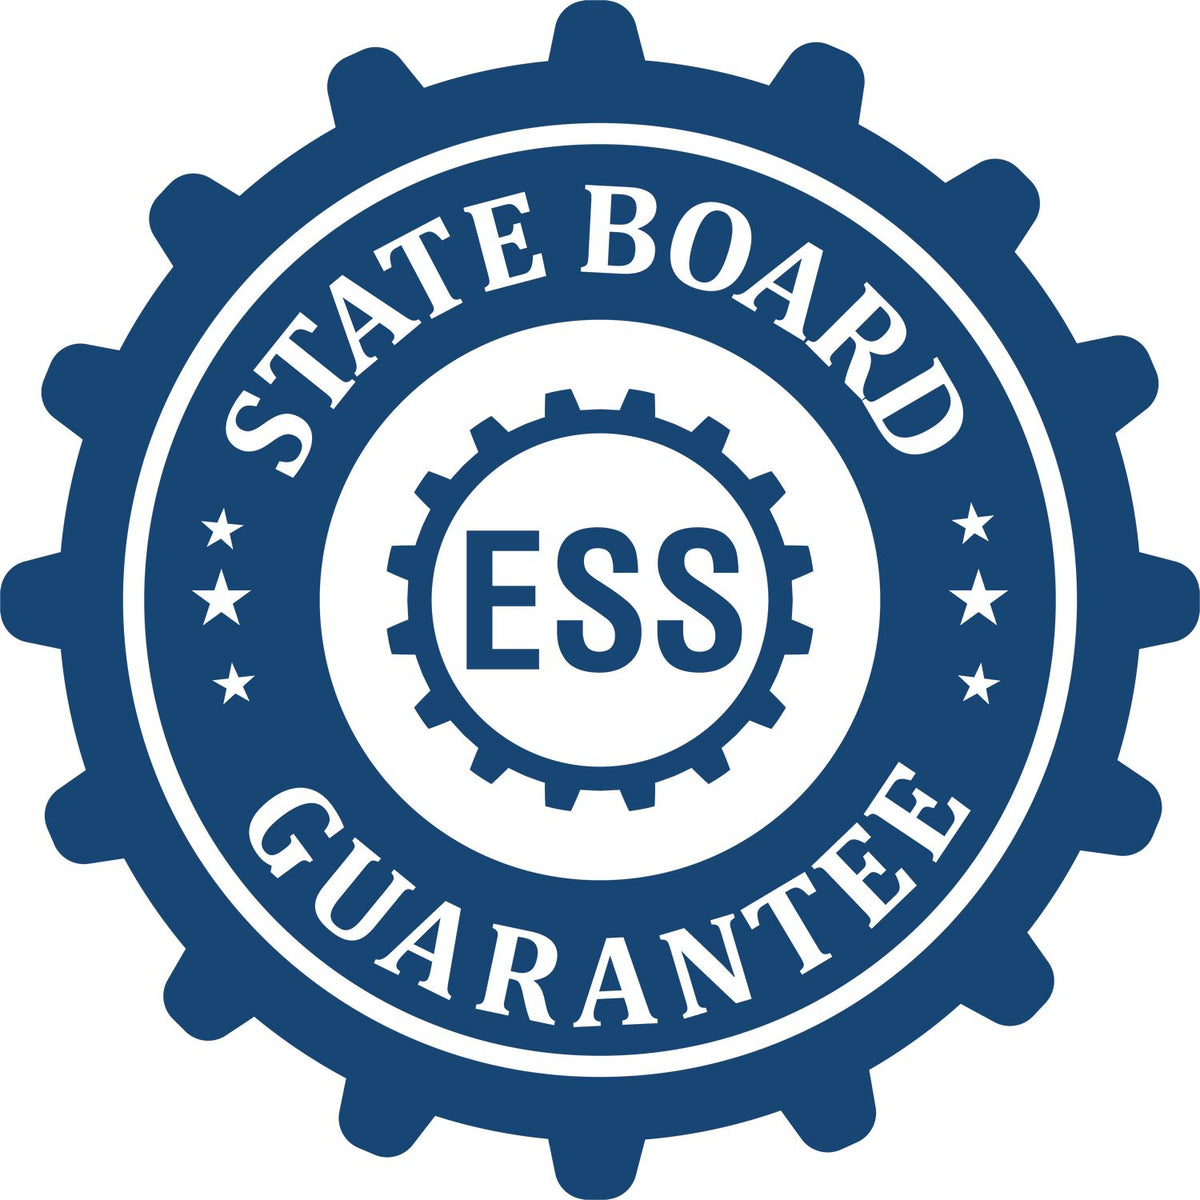 An emblem in a gear shape illustrating a state board guarantee for the Hybrid Indiana Engineer Seal